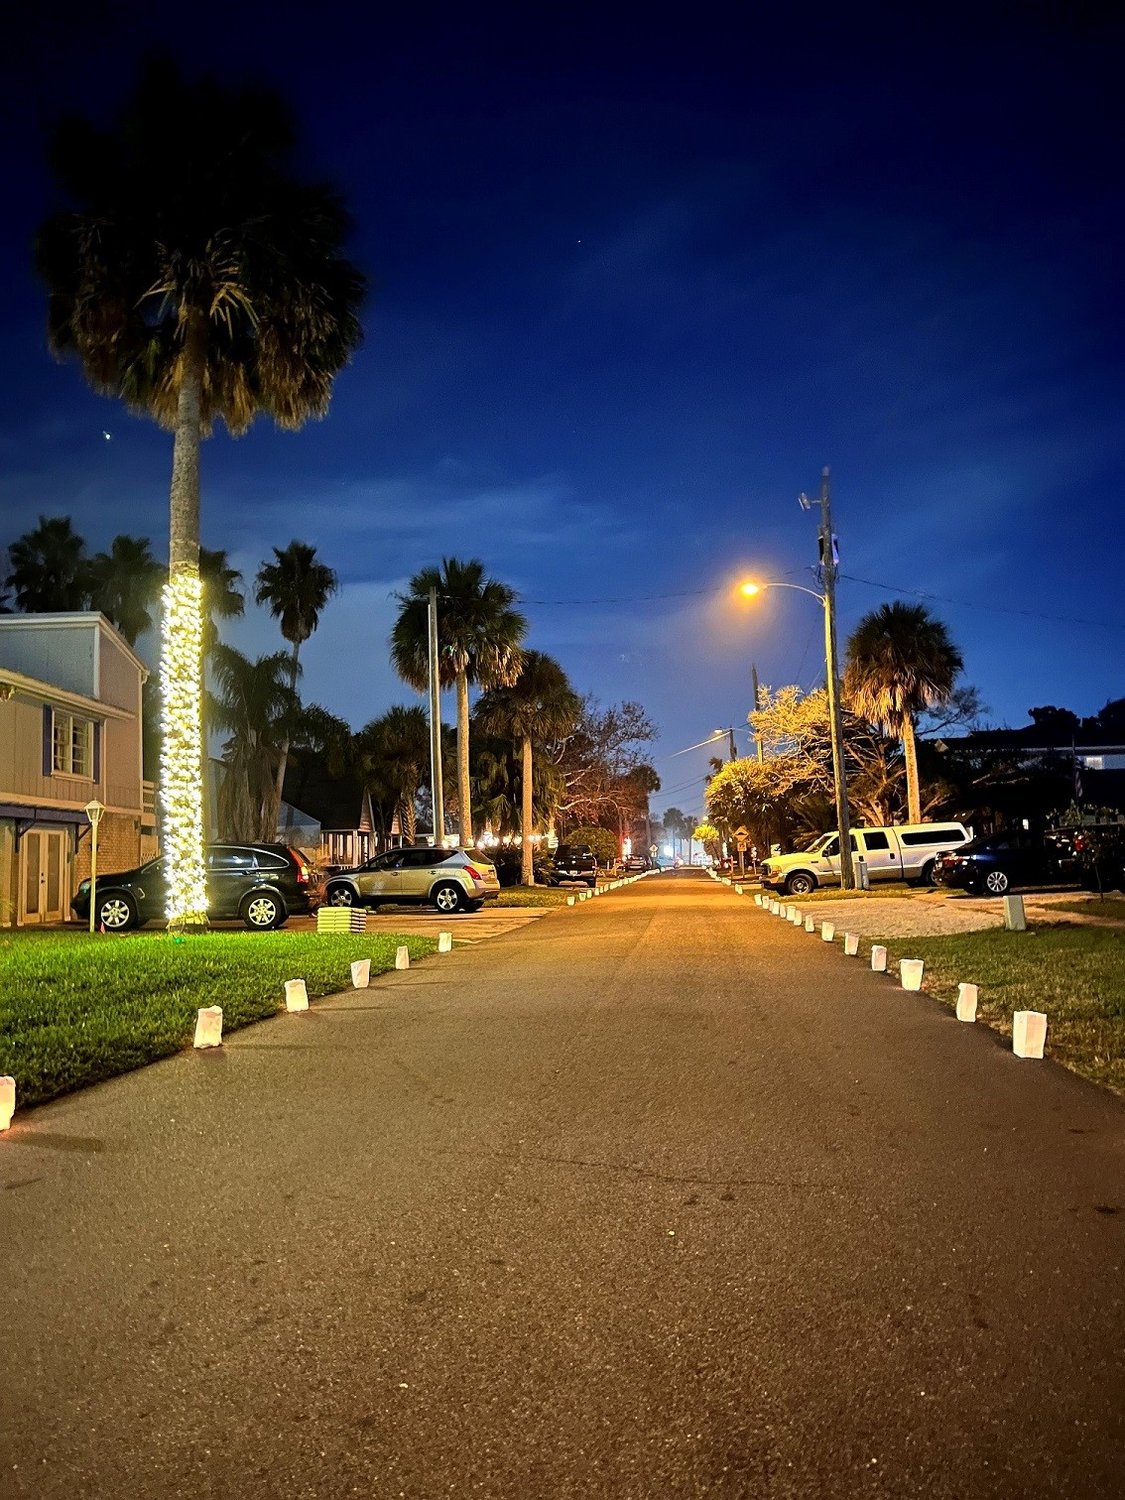 Berkshire Hathaway HomeServices Florida Network Realty’s Luminaria 2021 brought a holiday glow to Northeast Florida neighborhoods with proceeds supporting local charitable organizations.